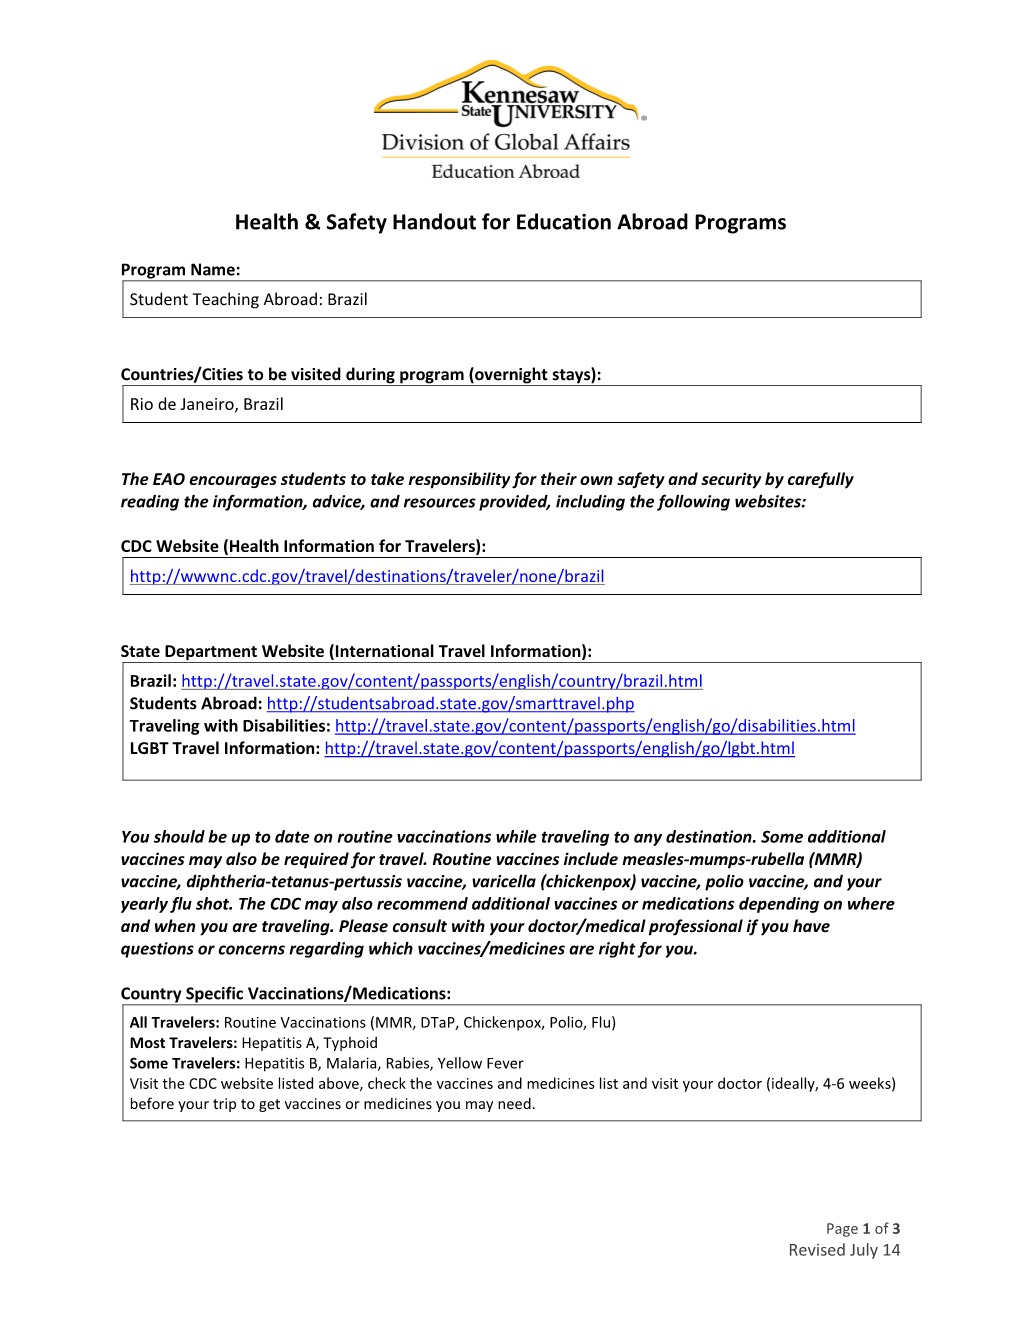 Health & Safety Handout for Education Abroad Programs